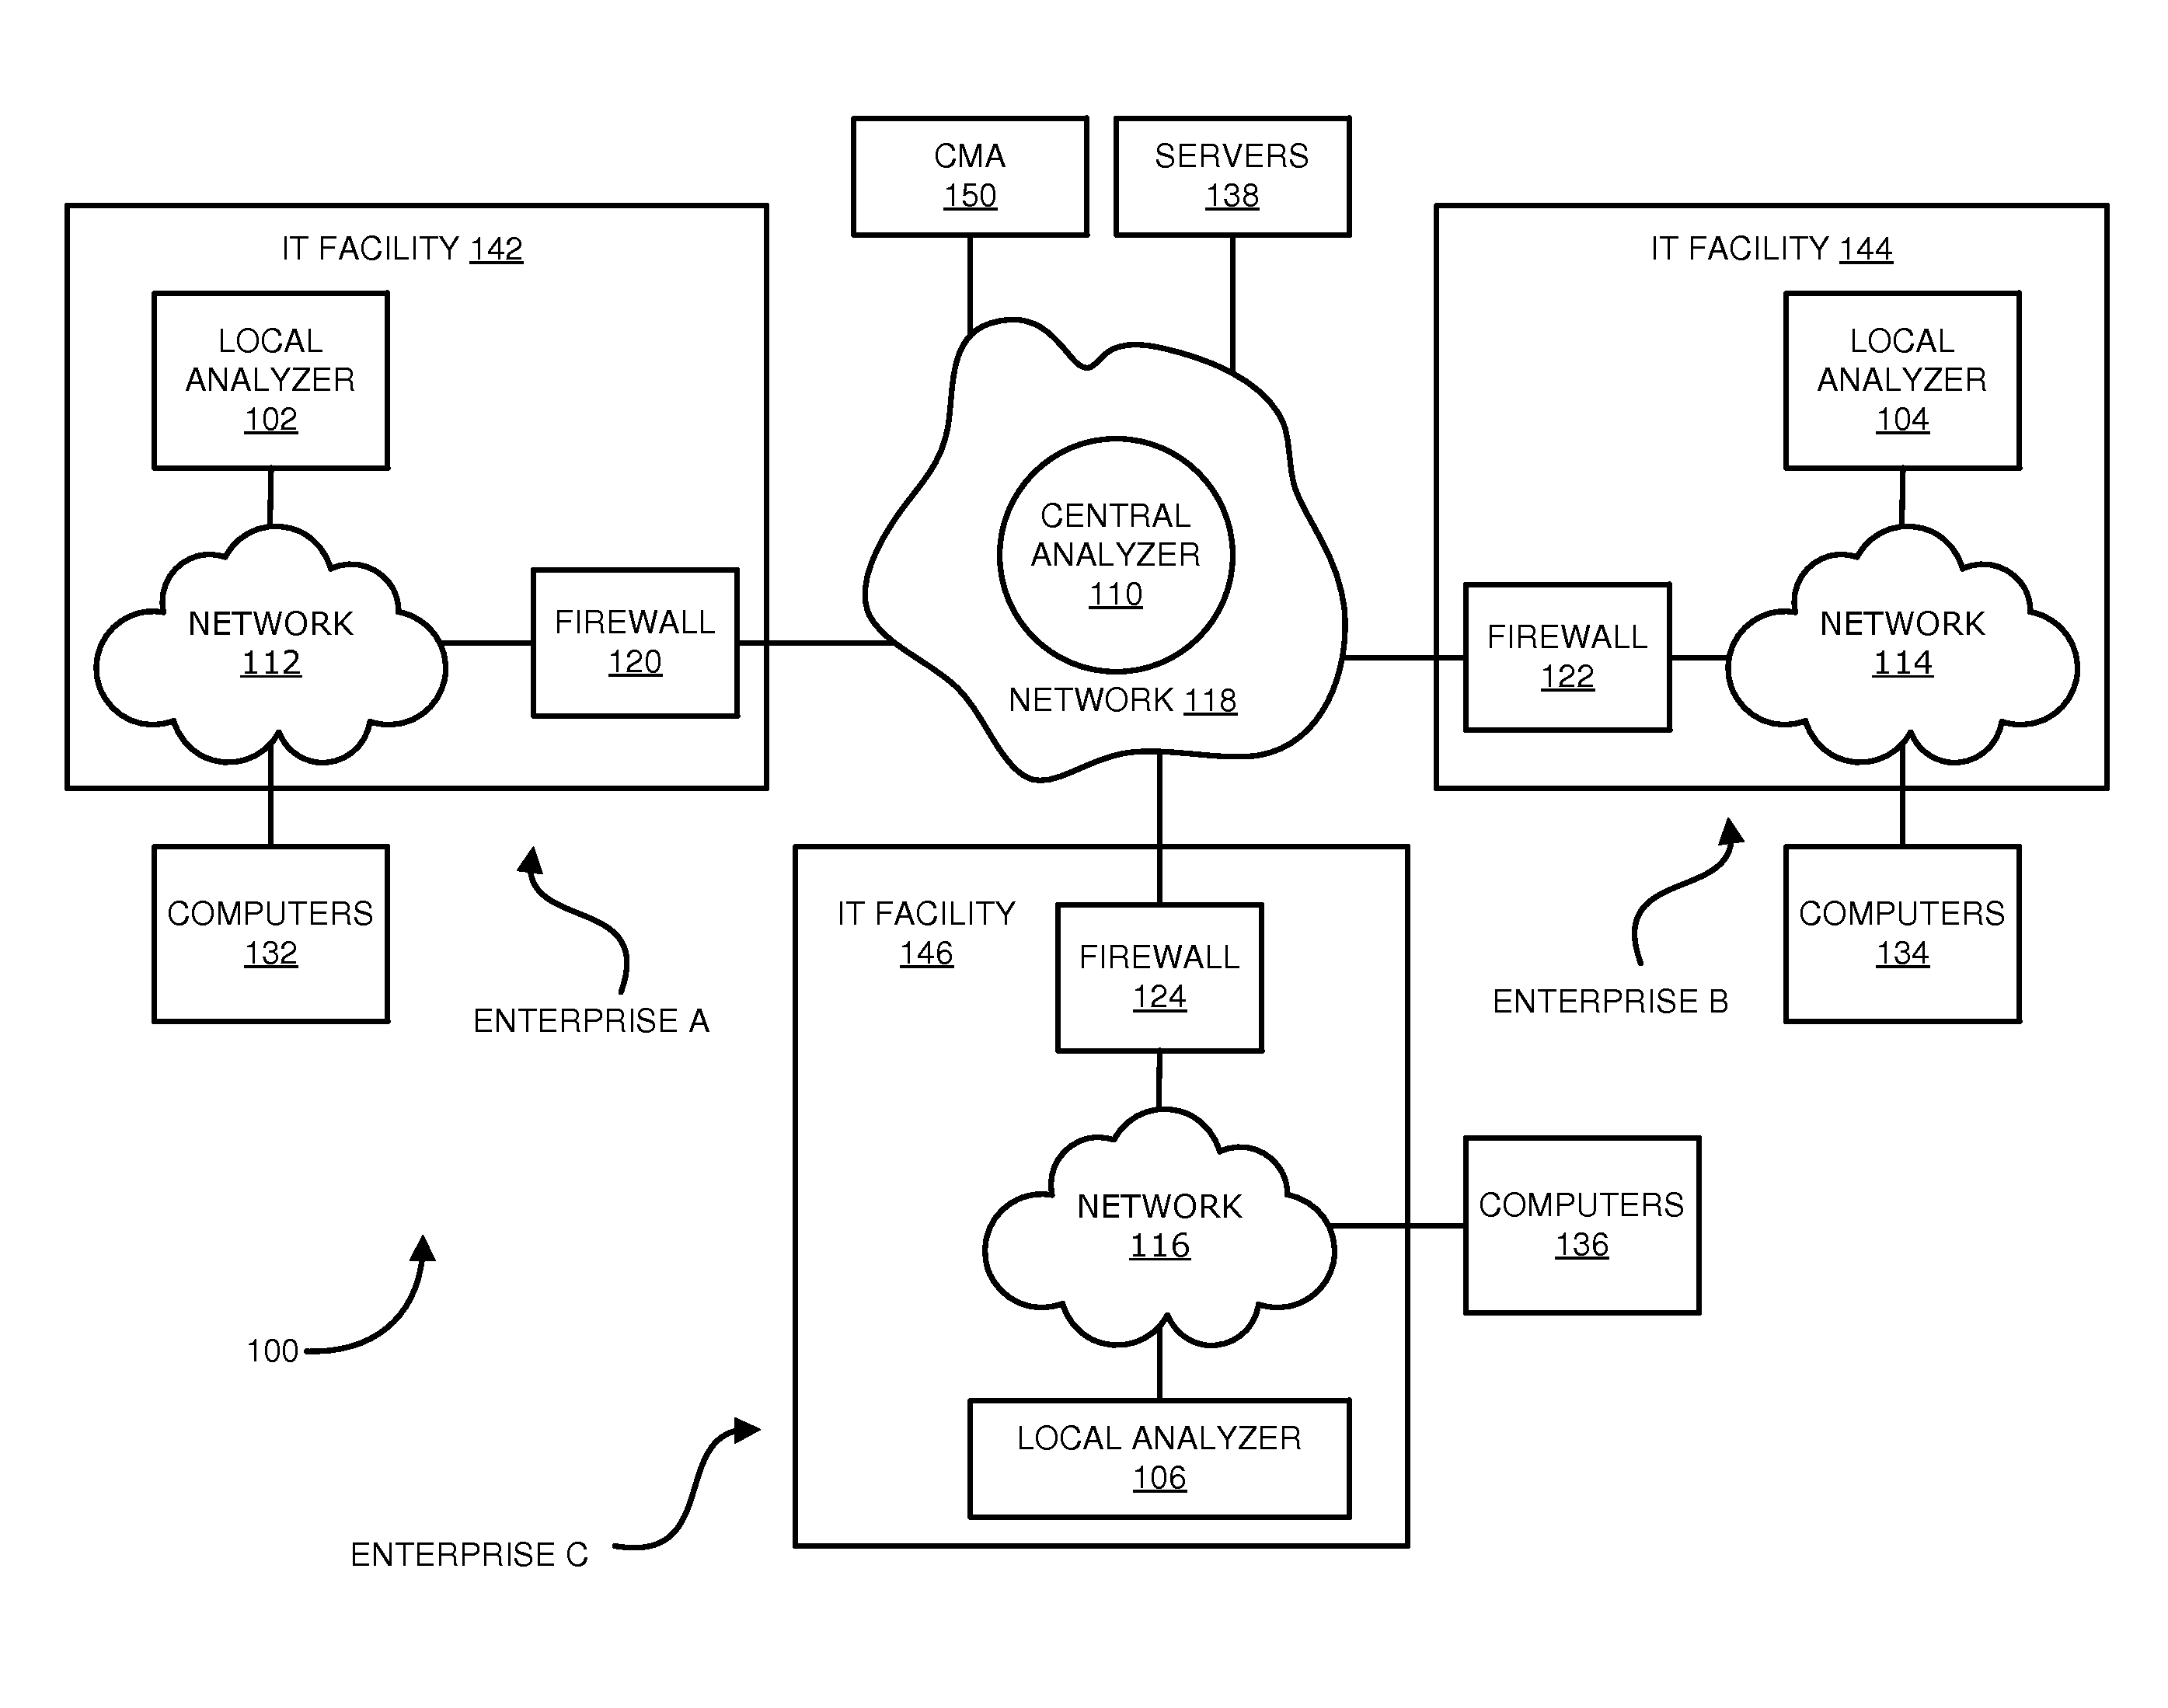 Distributed systems and methods for automatically detecting unknown bots and botnets